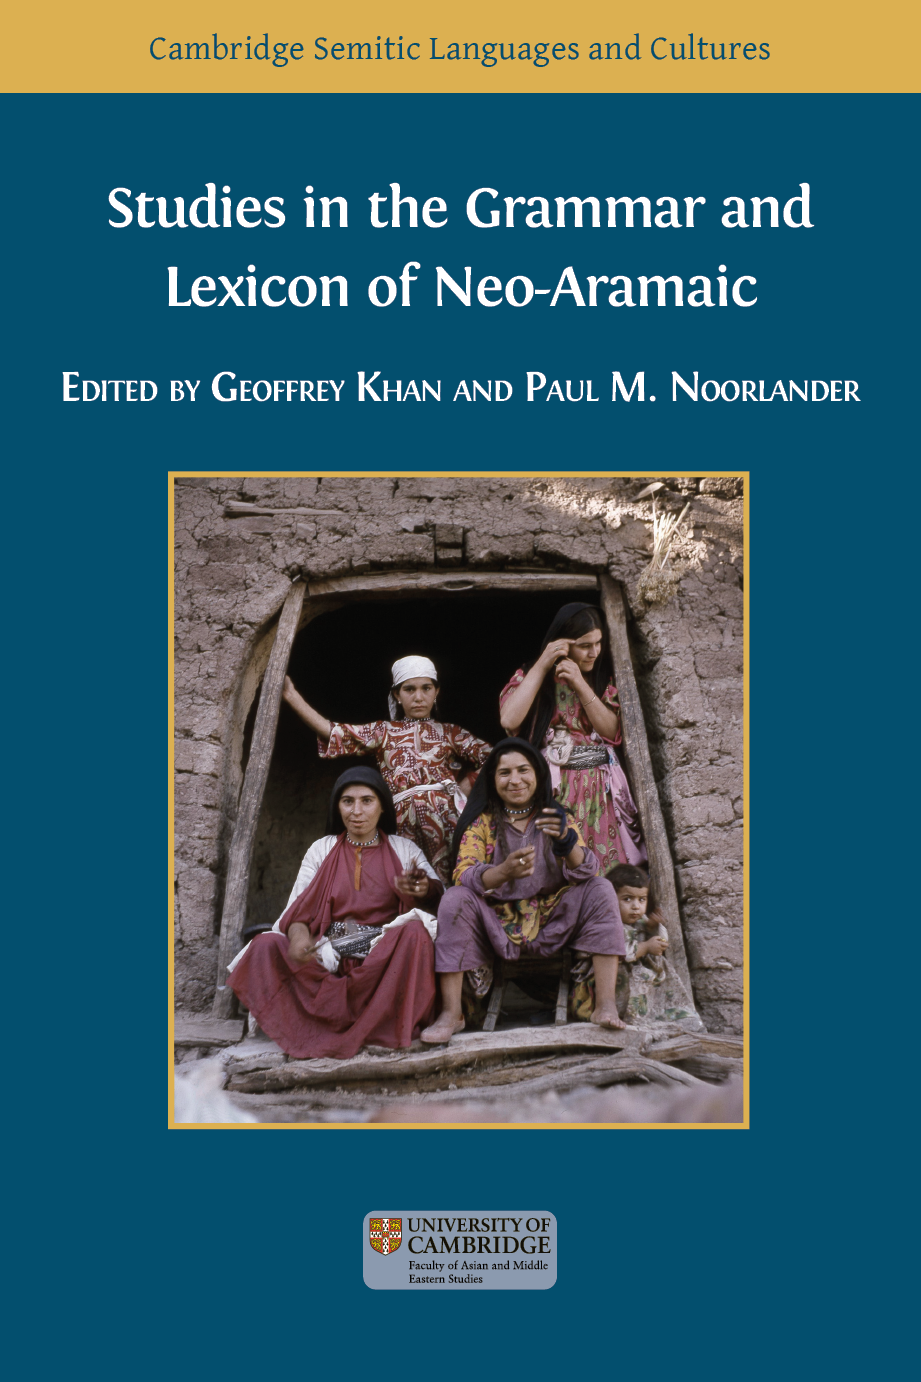 Studies in the Grammar and Lexicon of Neo-Aramaic book cover image